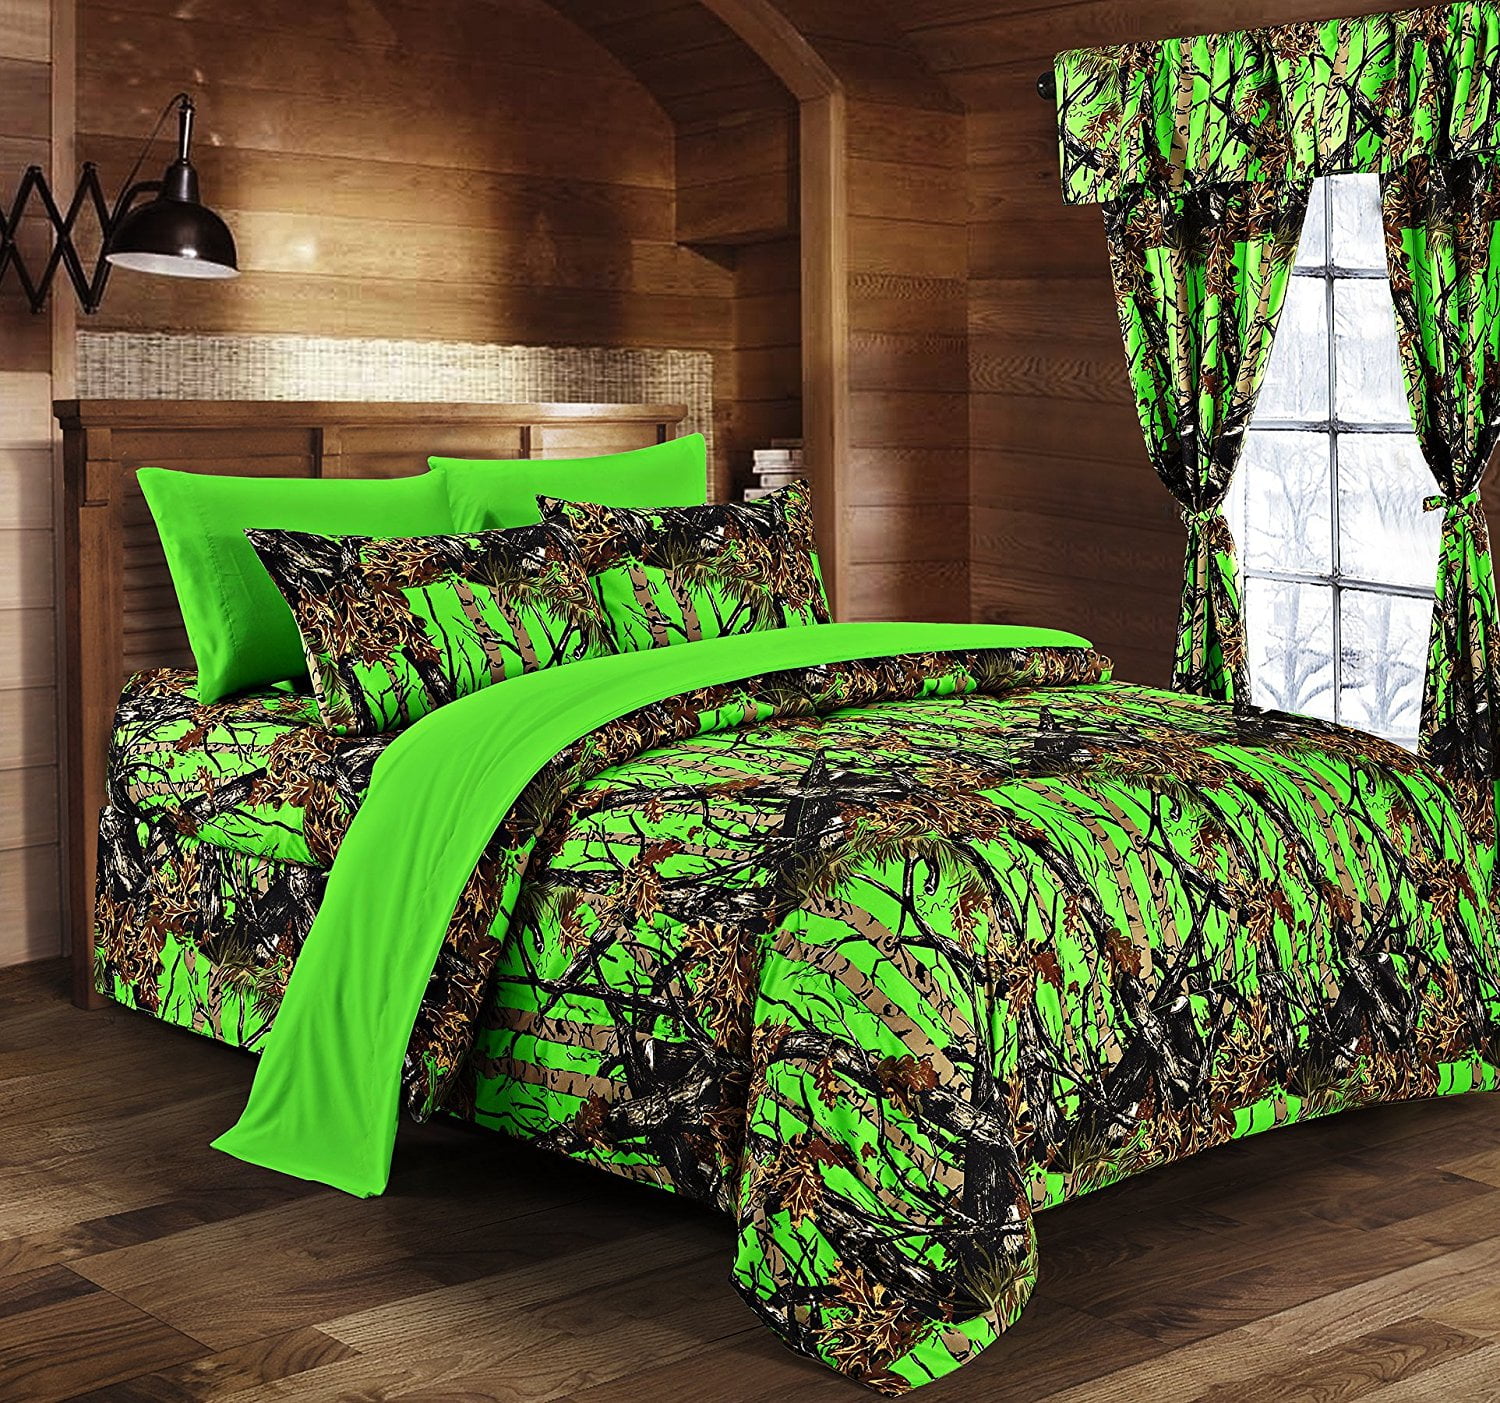 7 PC SET CAMO COMFORTER AND SHEET SET QUEEN BED IN BAG SET CAMOUFLAGE WOODS 